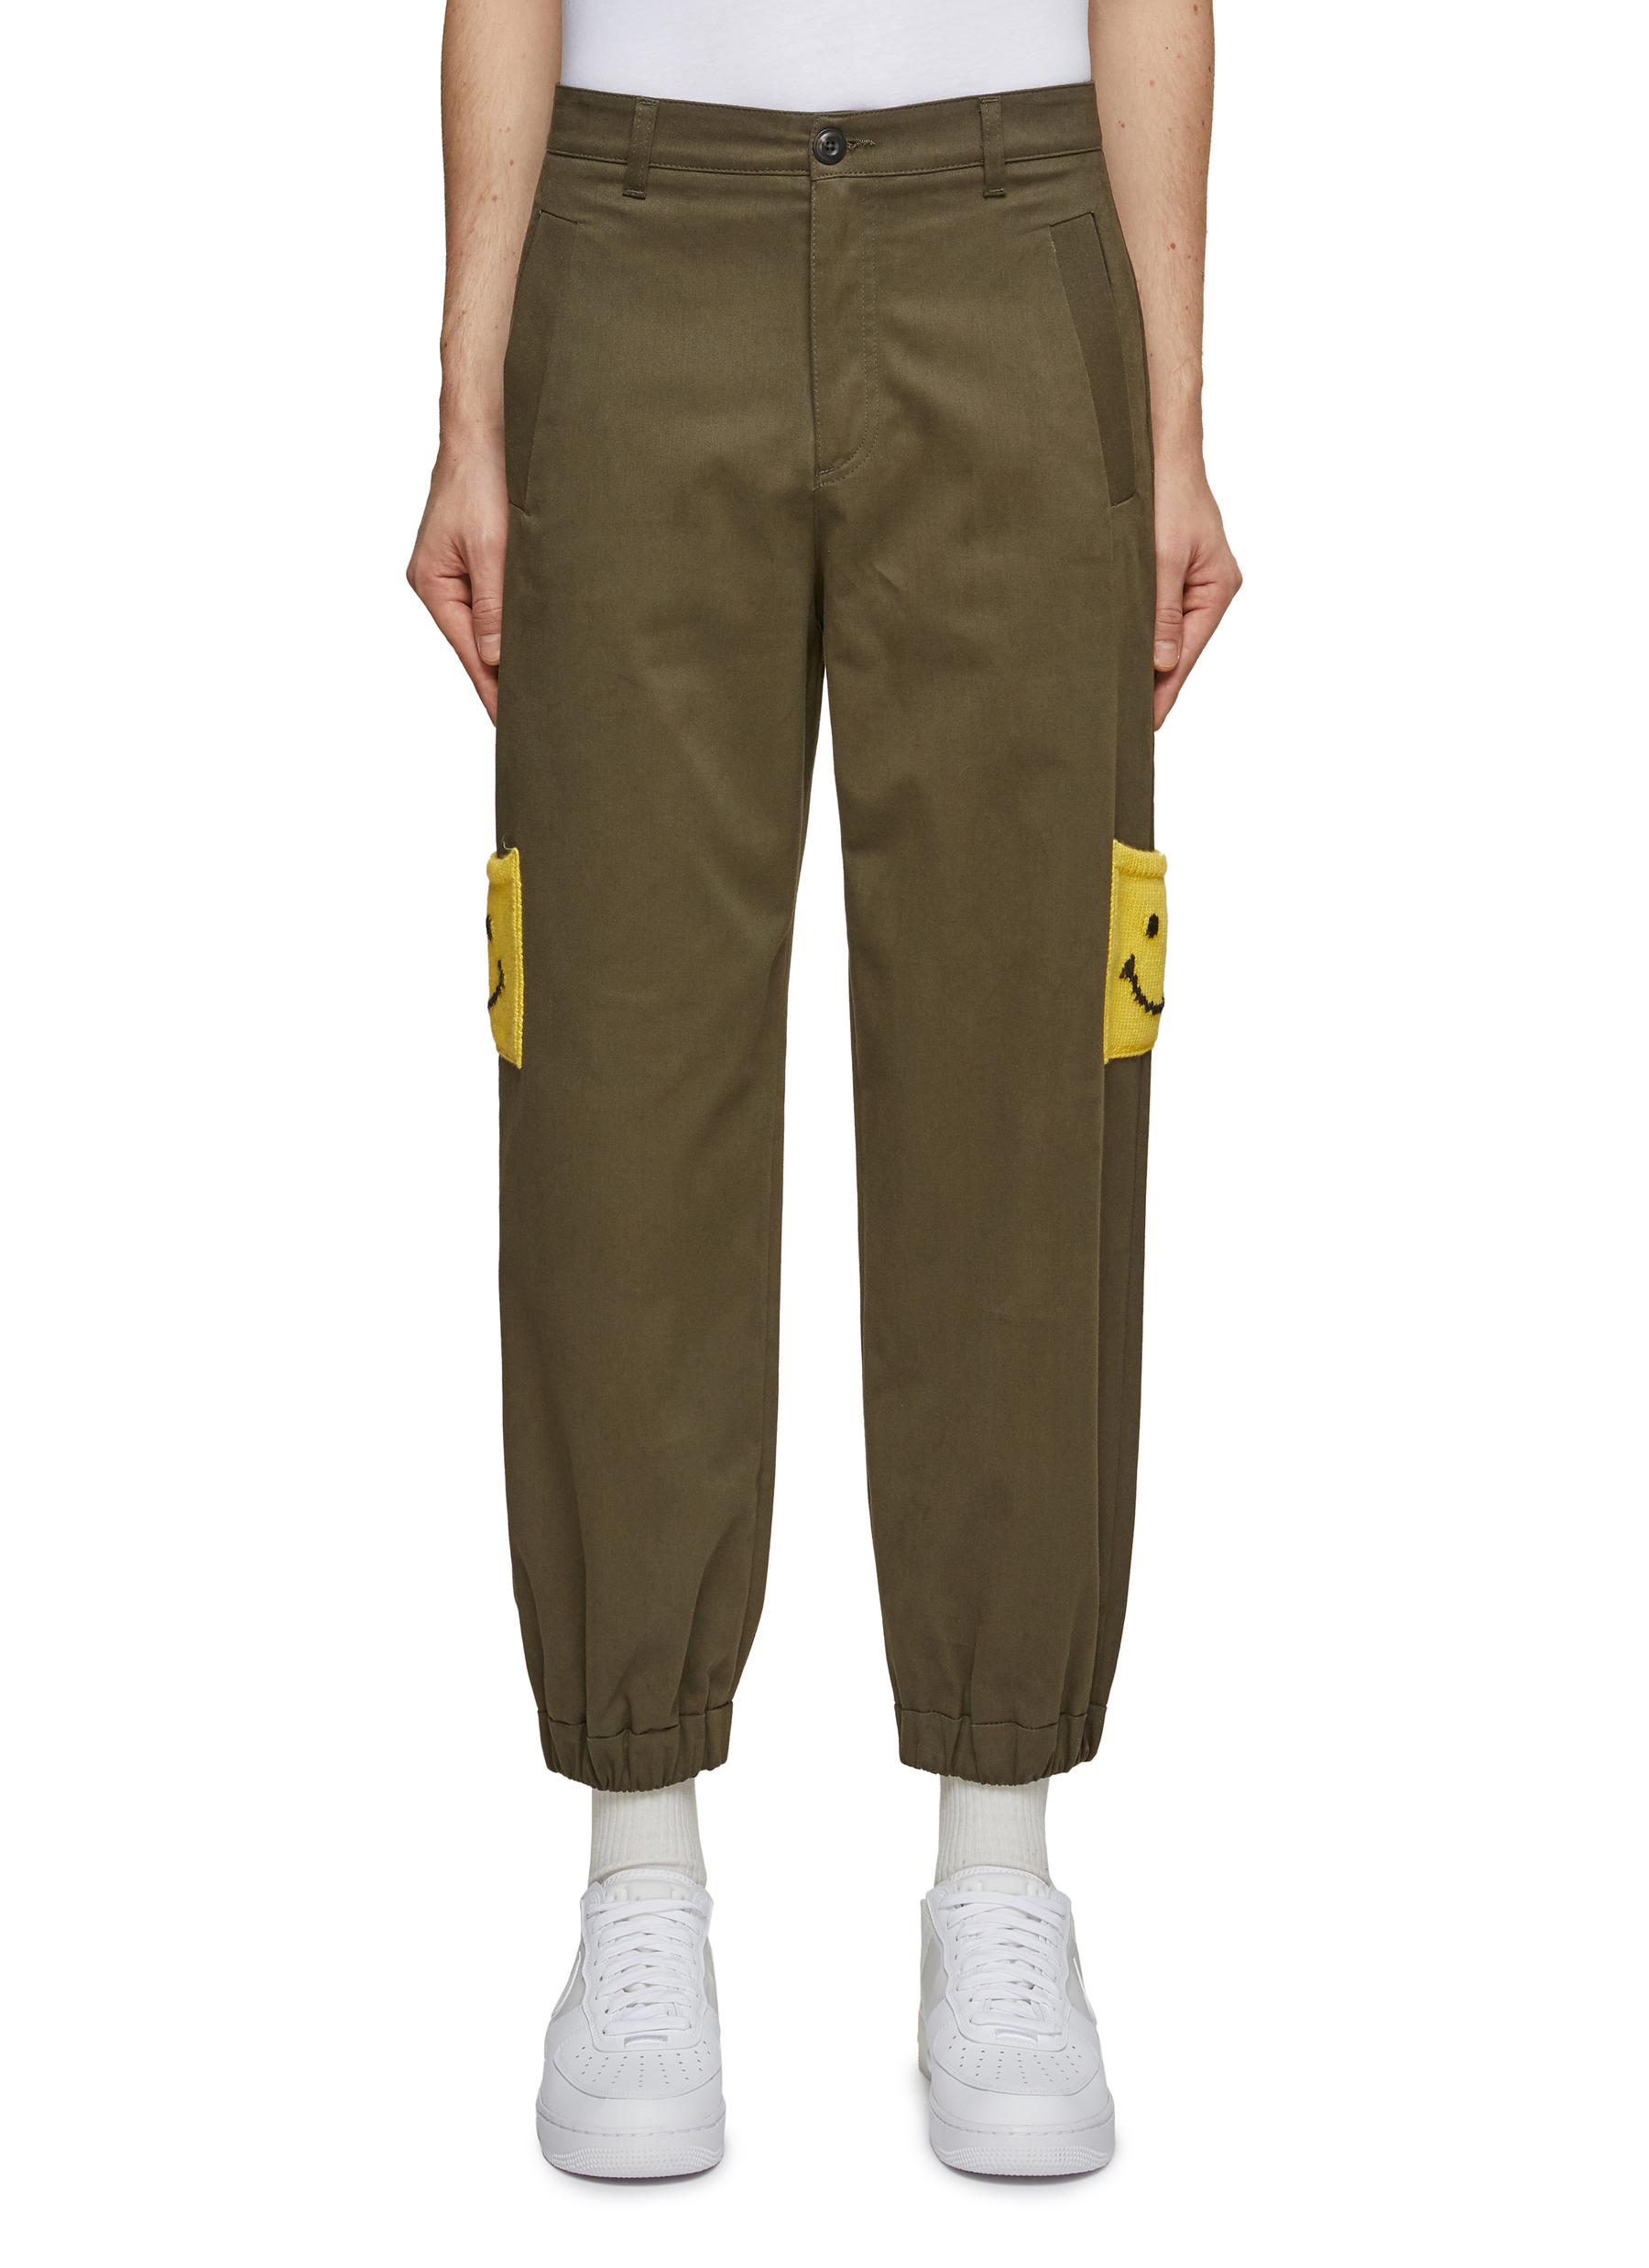 SMILEY FACE KNITTED PATCH CARGO PANTS